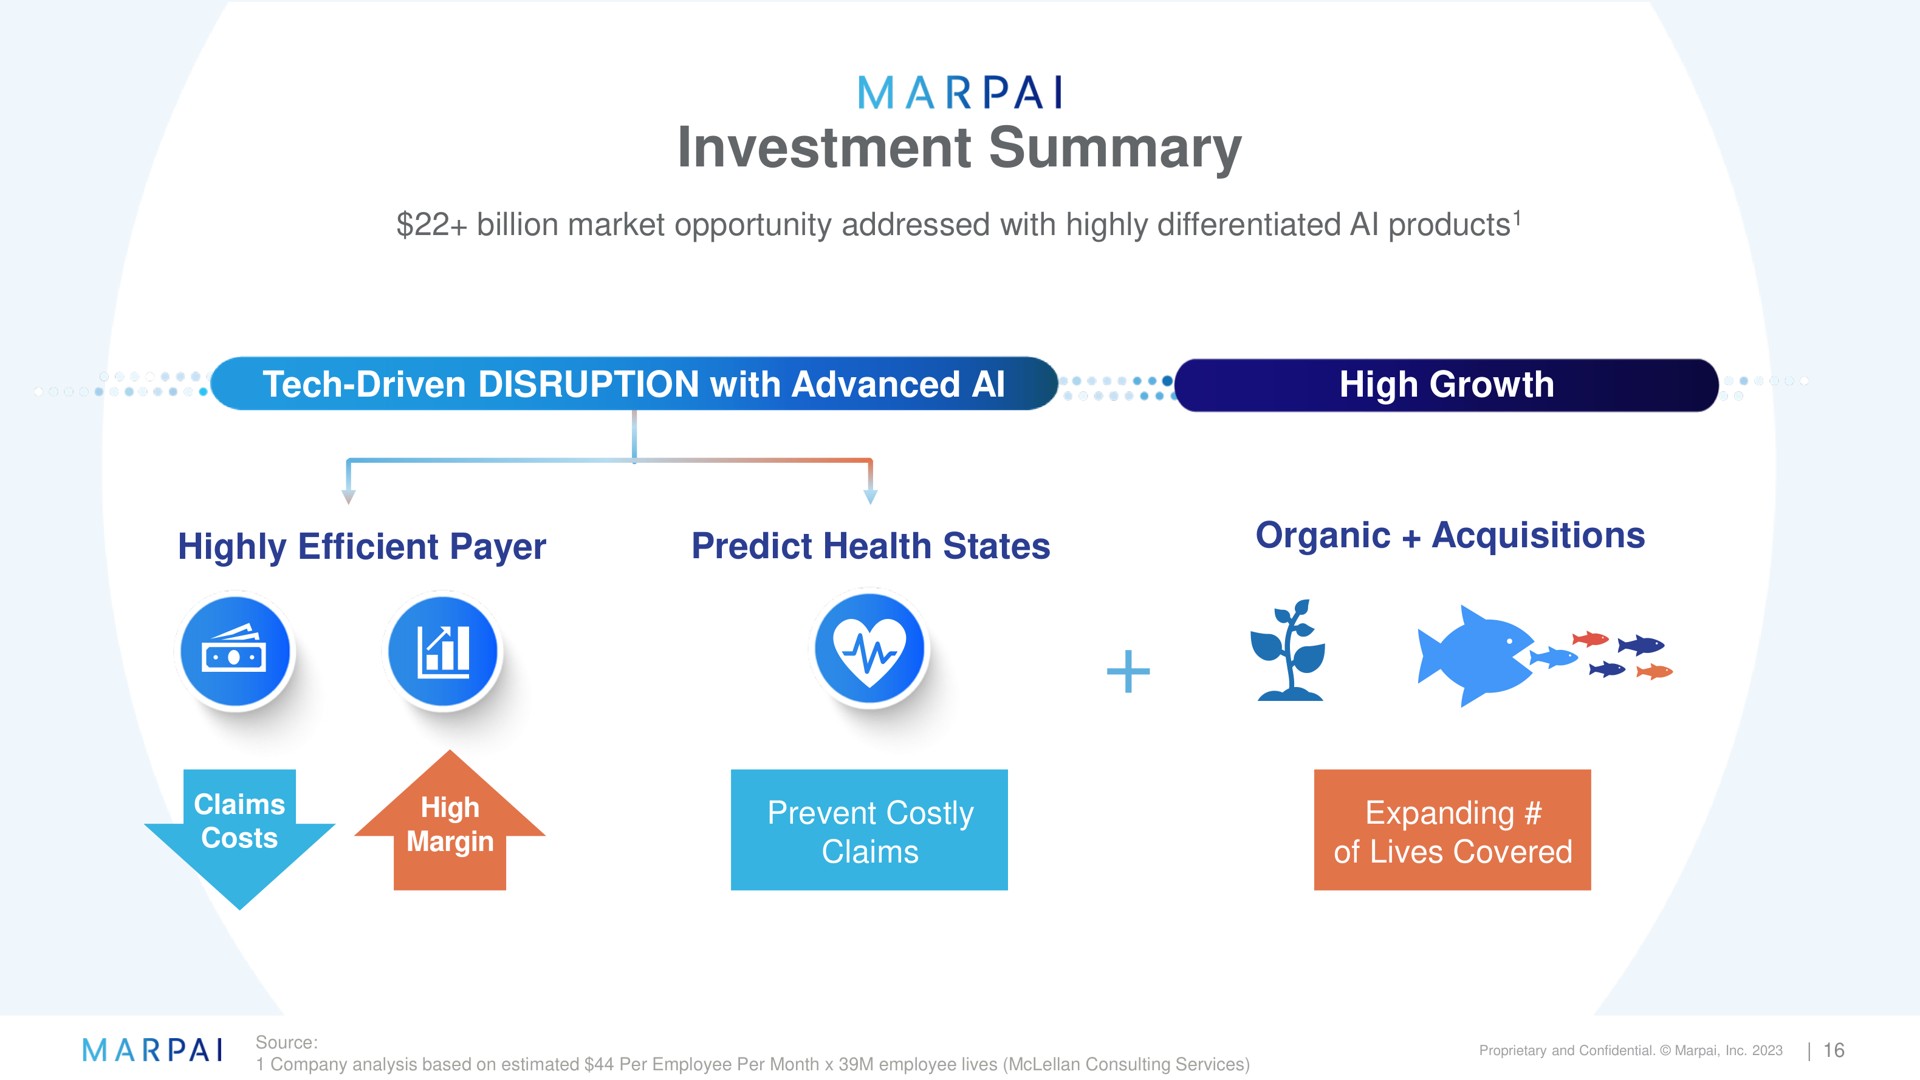 investment summary sal ale highly efficient payer predict health states organic acquisitions | Marpai